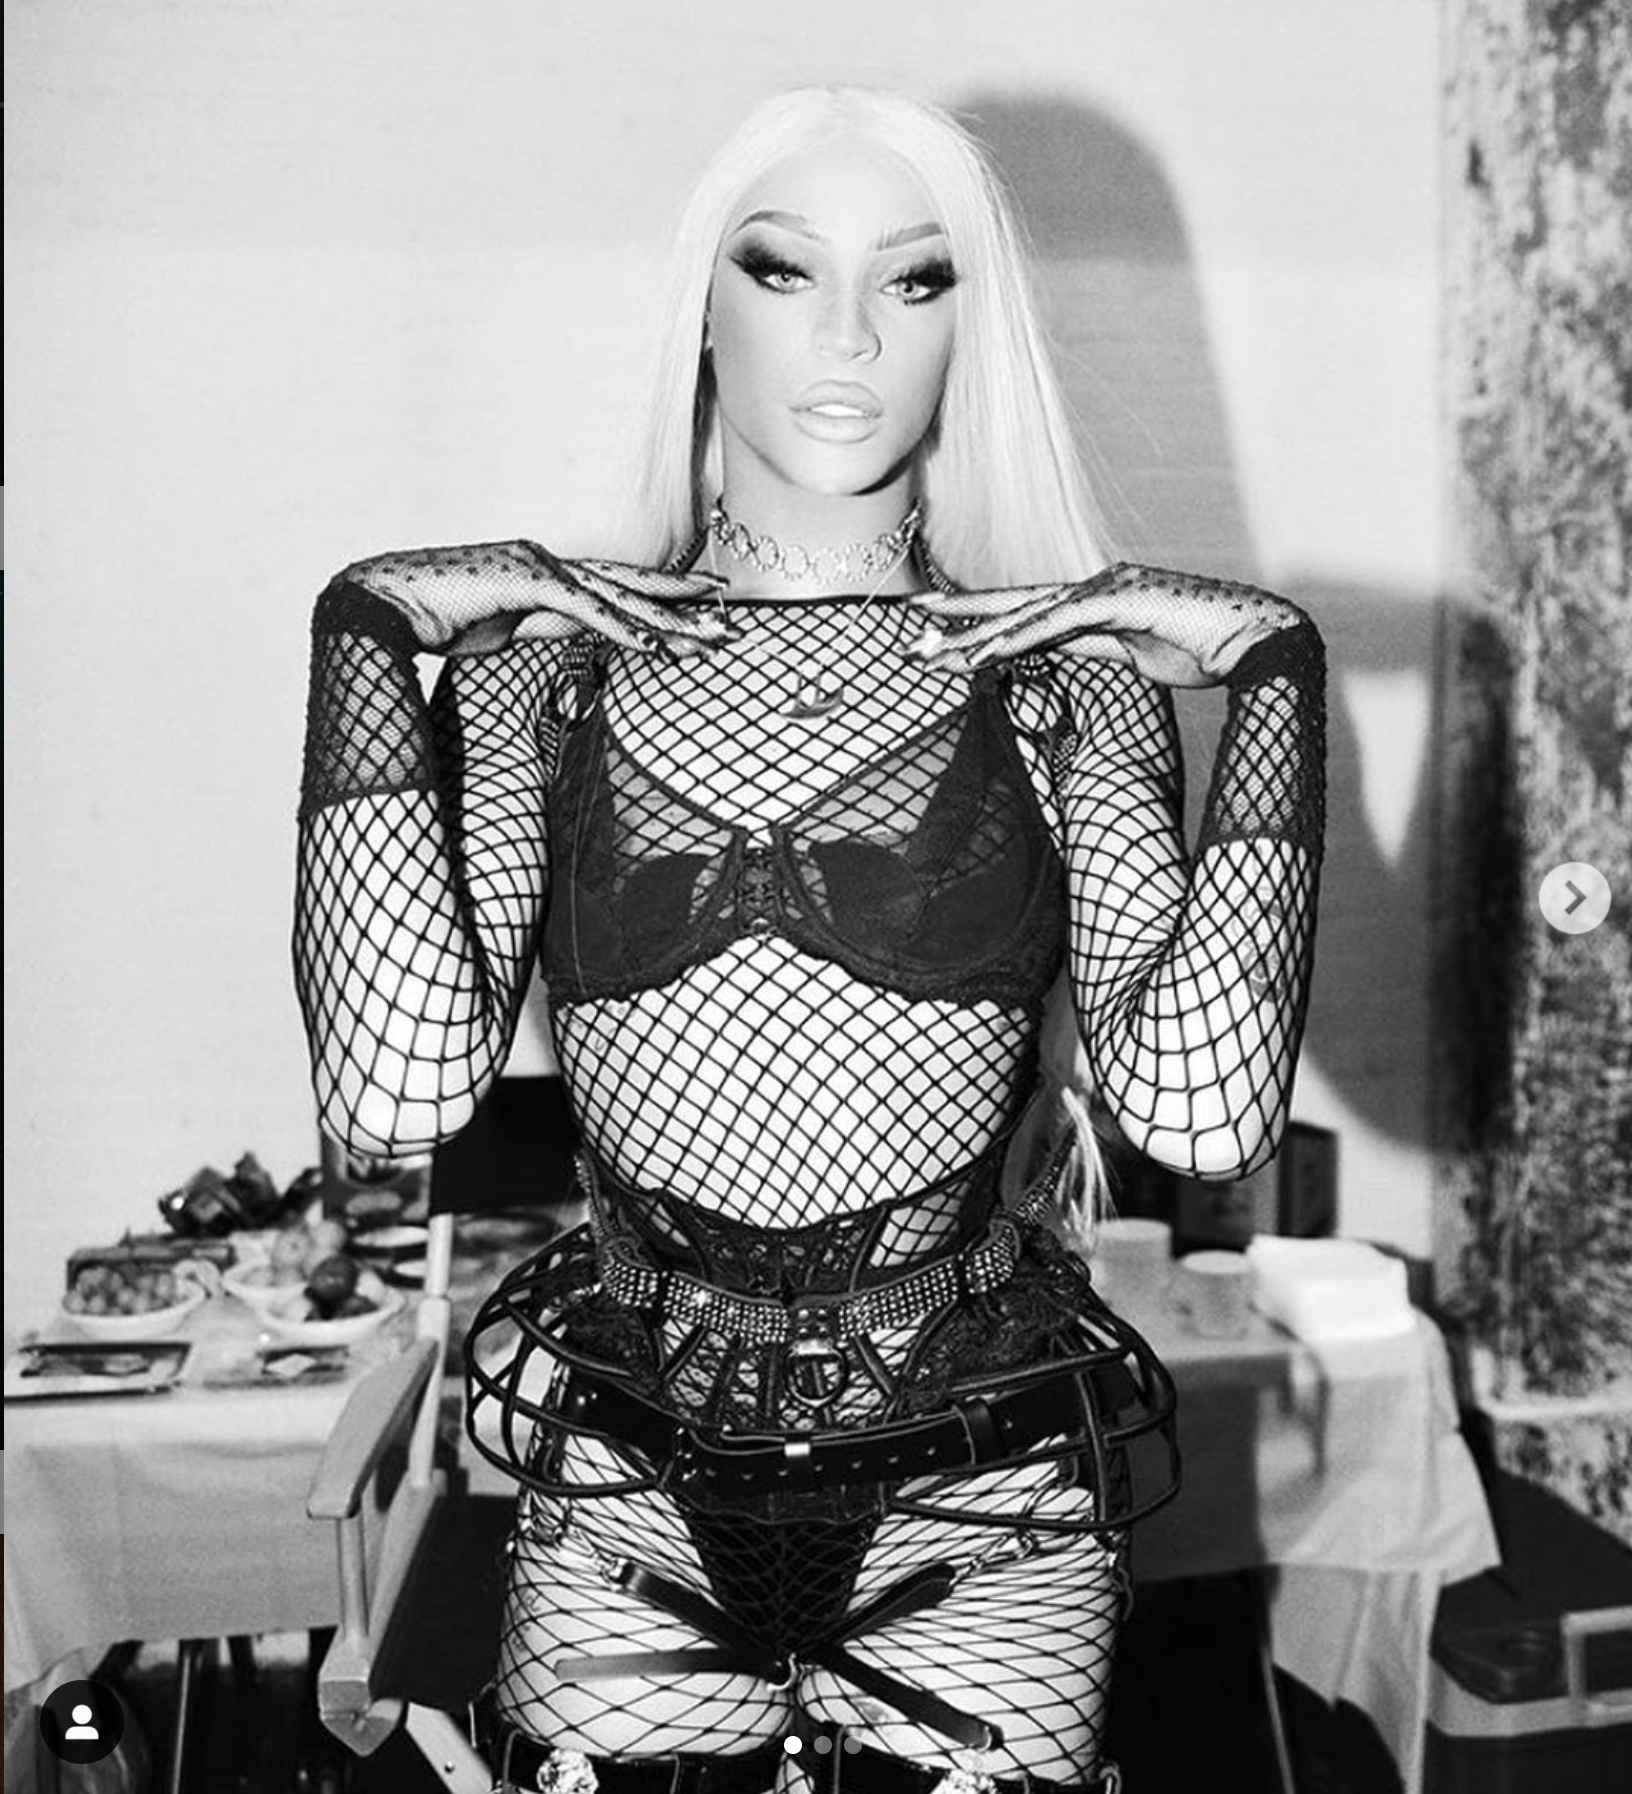 Pabllo Vittar Wearing The Slicer Necklace for Timida Music Video